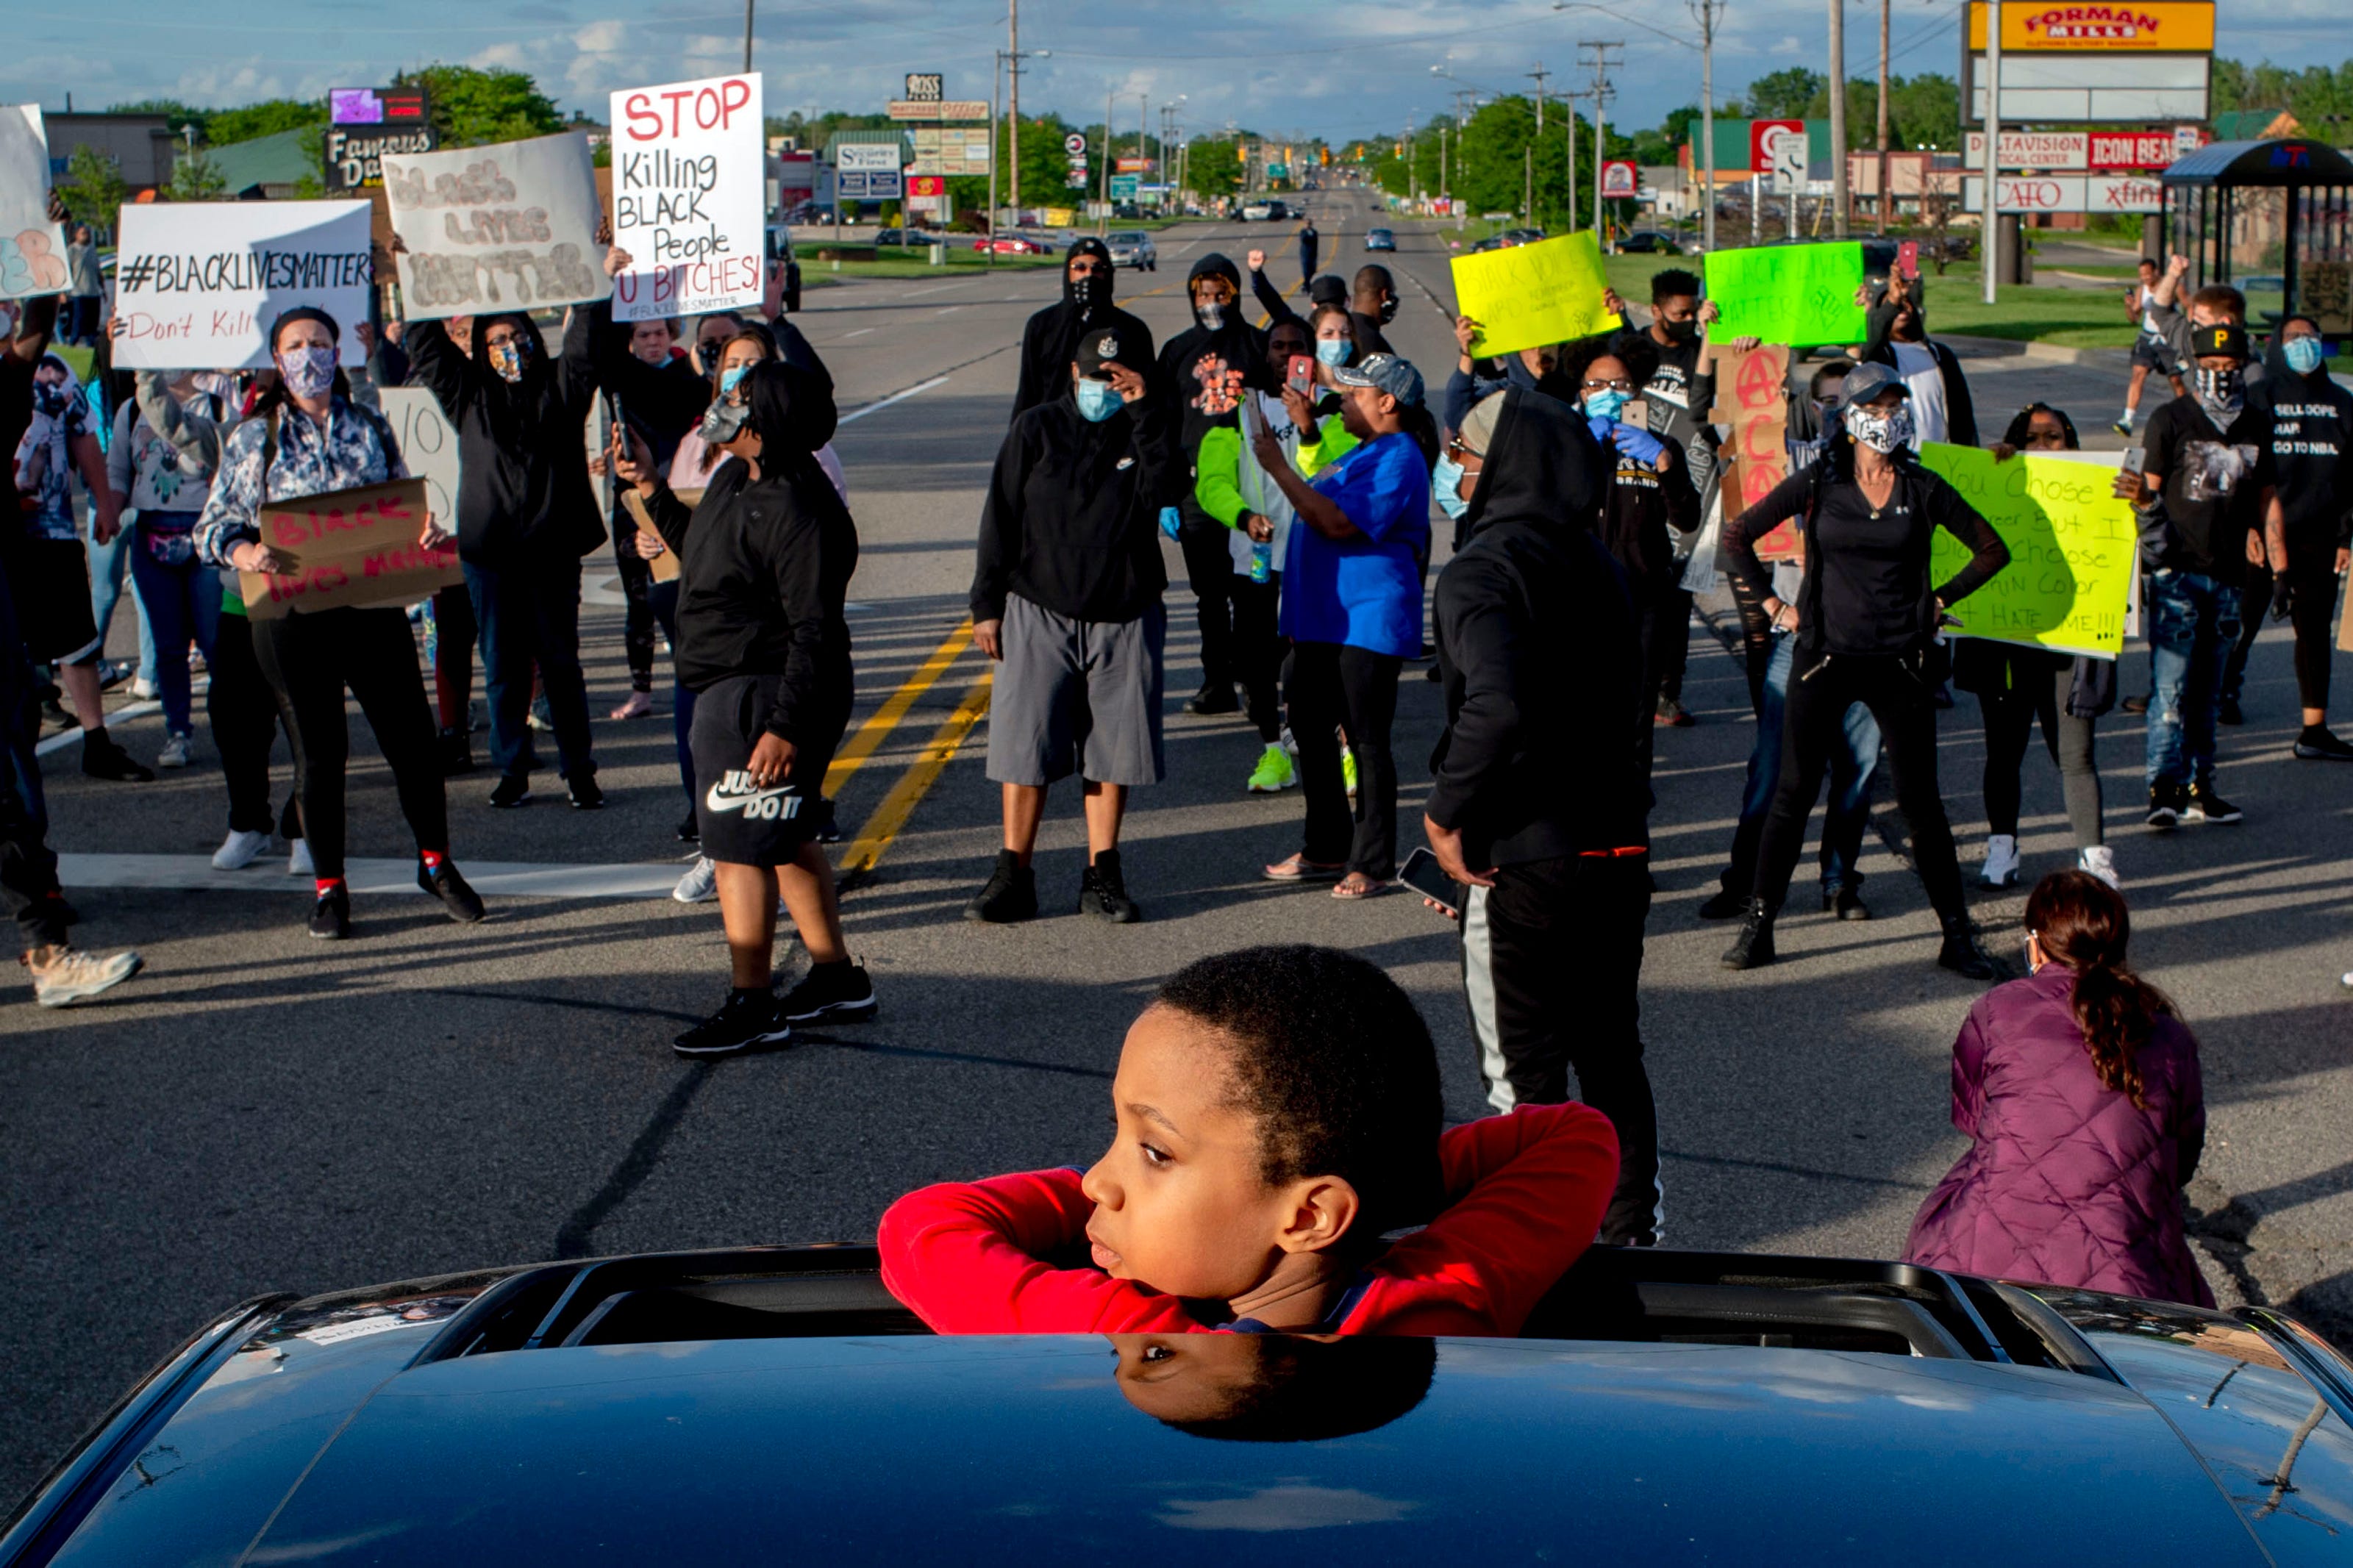 Ameer Watkins, 7, of Flint, looks out from a sunroof at the protest after his mother parked the car to join as hundreds march at peaceful protest seeking justice for George Floyd on Saturday, May 30, 2020 on Miller Road in Flint Township, M.I. Floyd died in police custody on Memorial Day in Minneapolis.